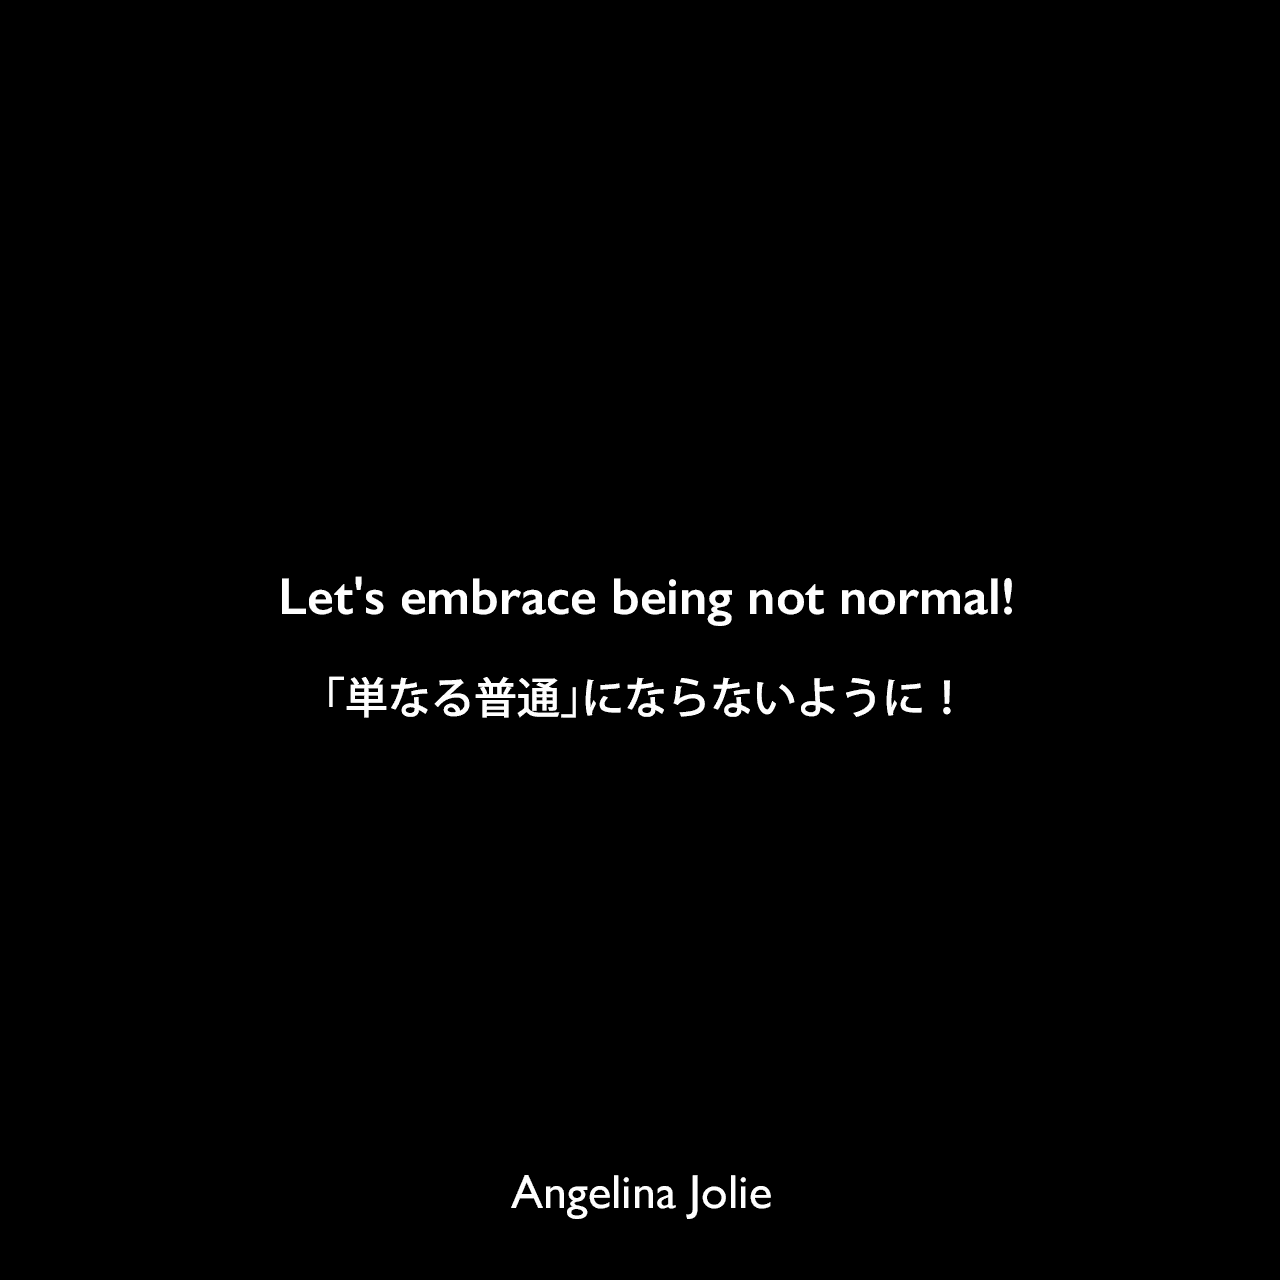 Let's embrace being not normal!「単なる普通」にならないように！Angelina Jolie